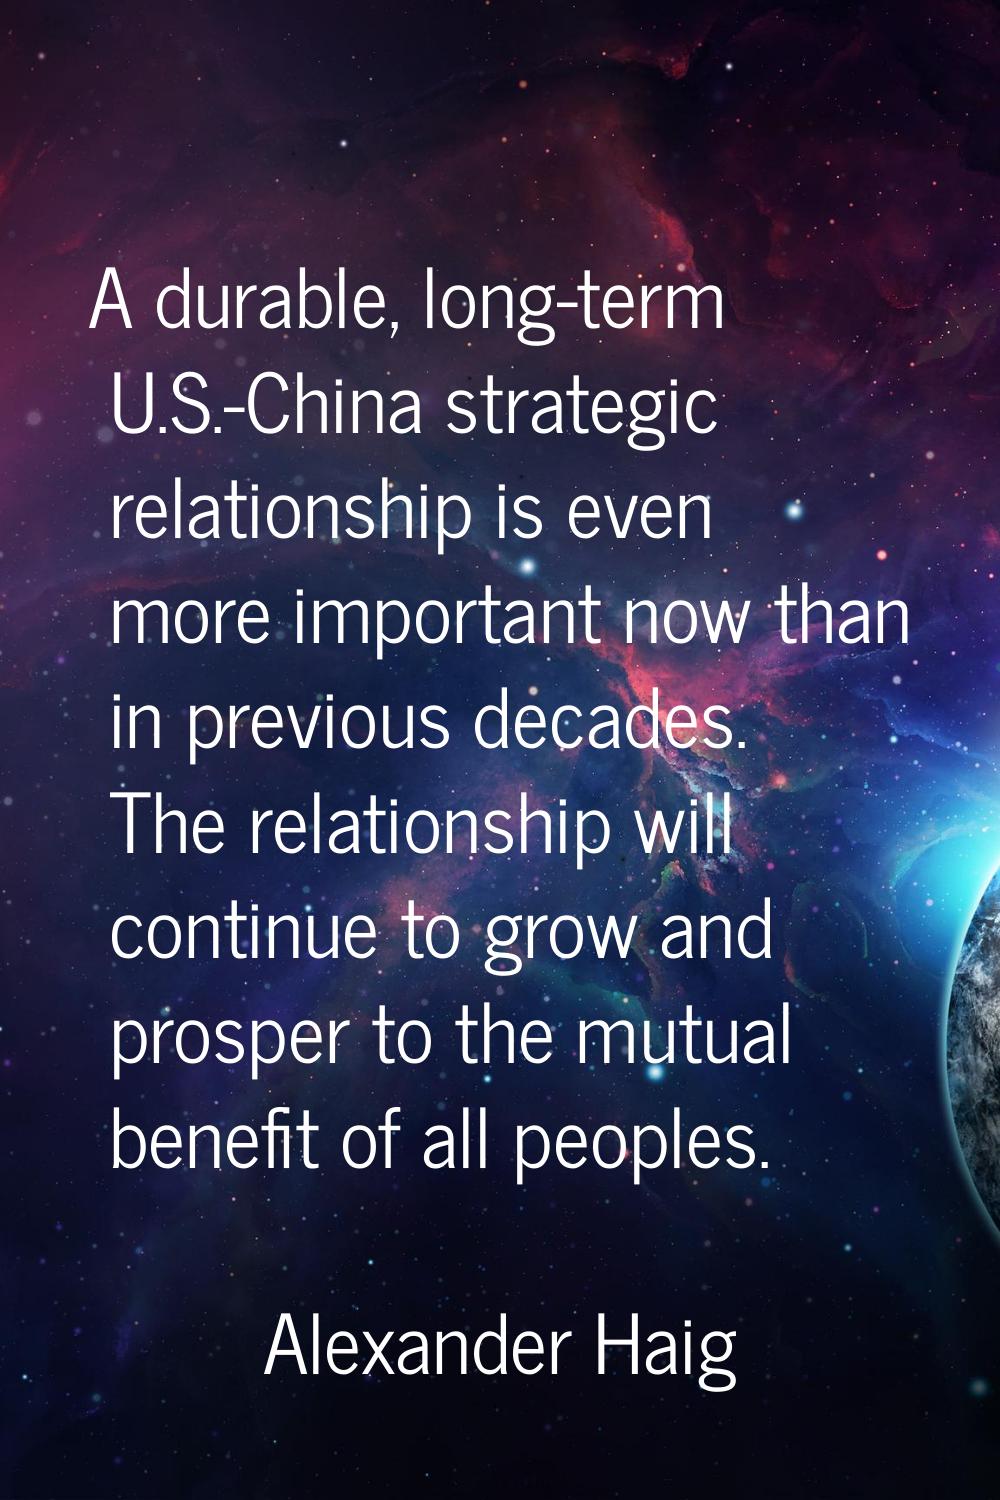 A durable, long-term U.S.-China strategic relationship is even more important now than in previous 